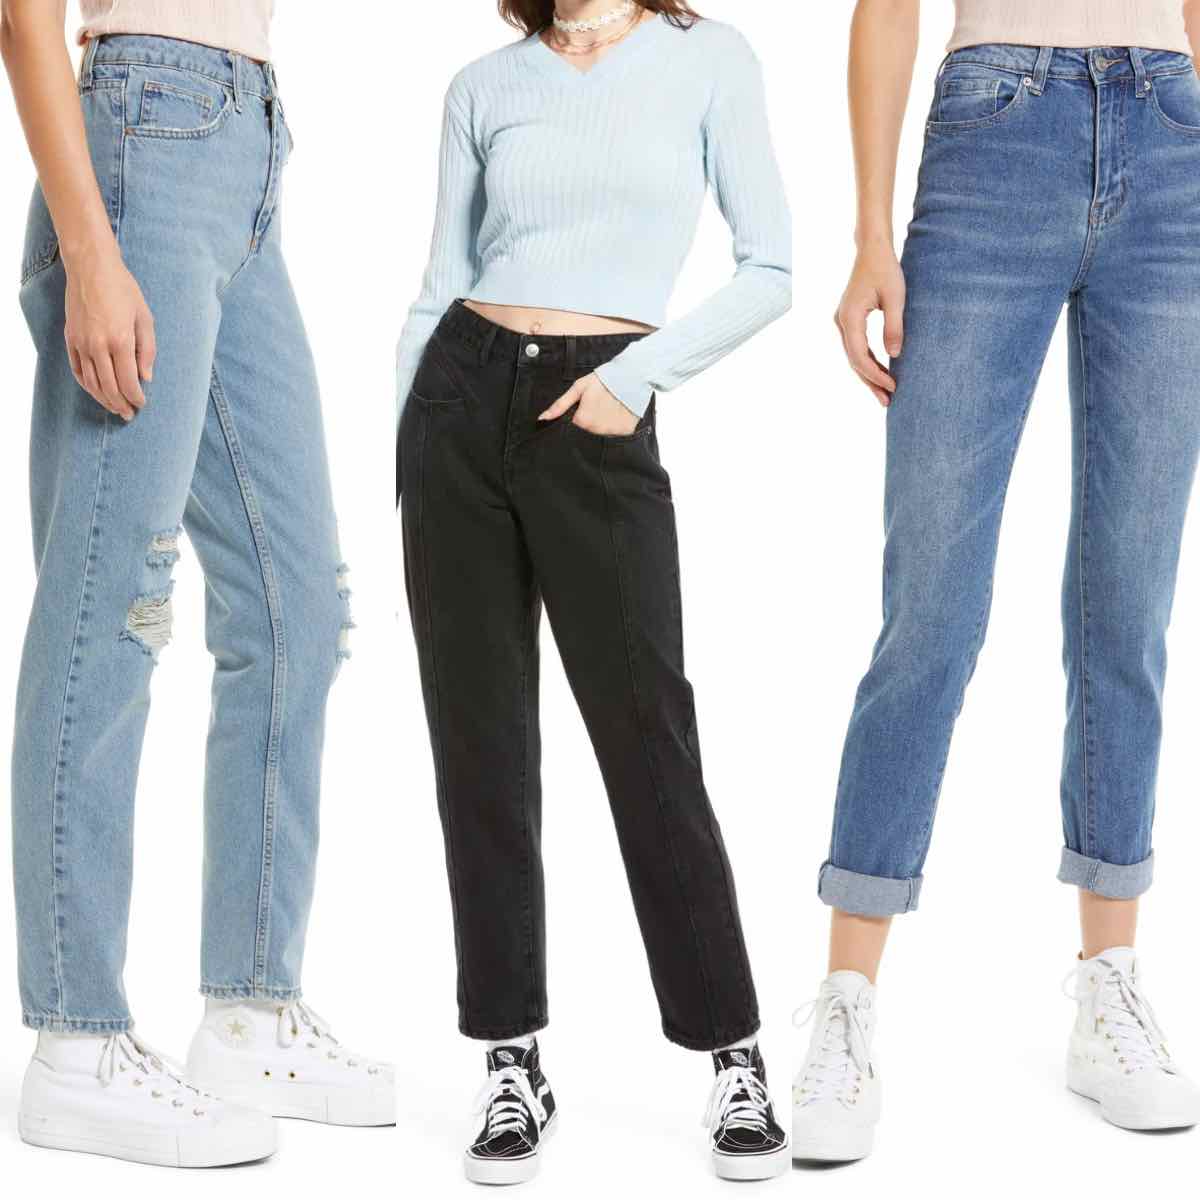 3 women wearing mom jeans with high top sneakers.